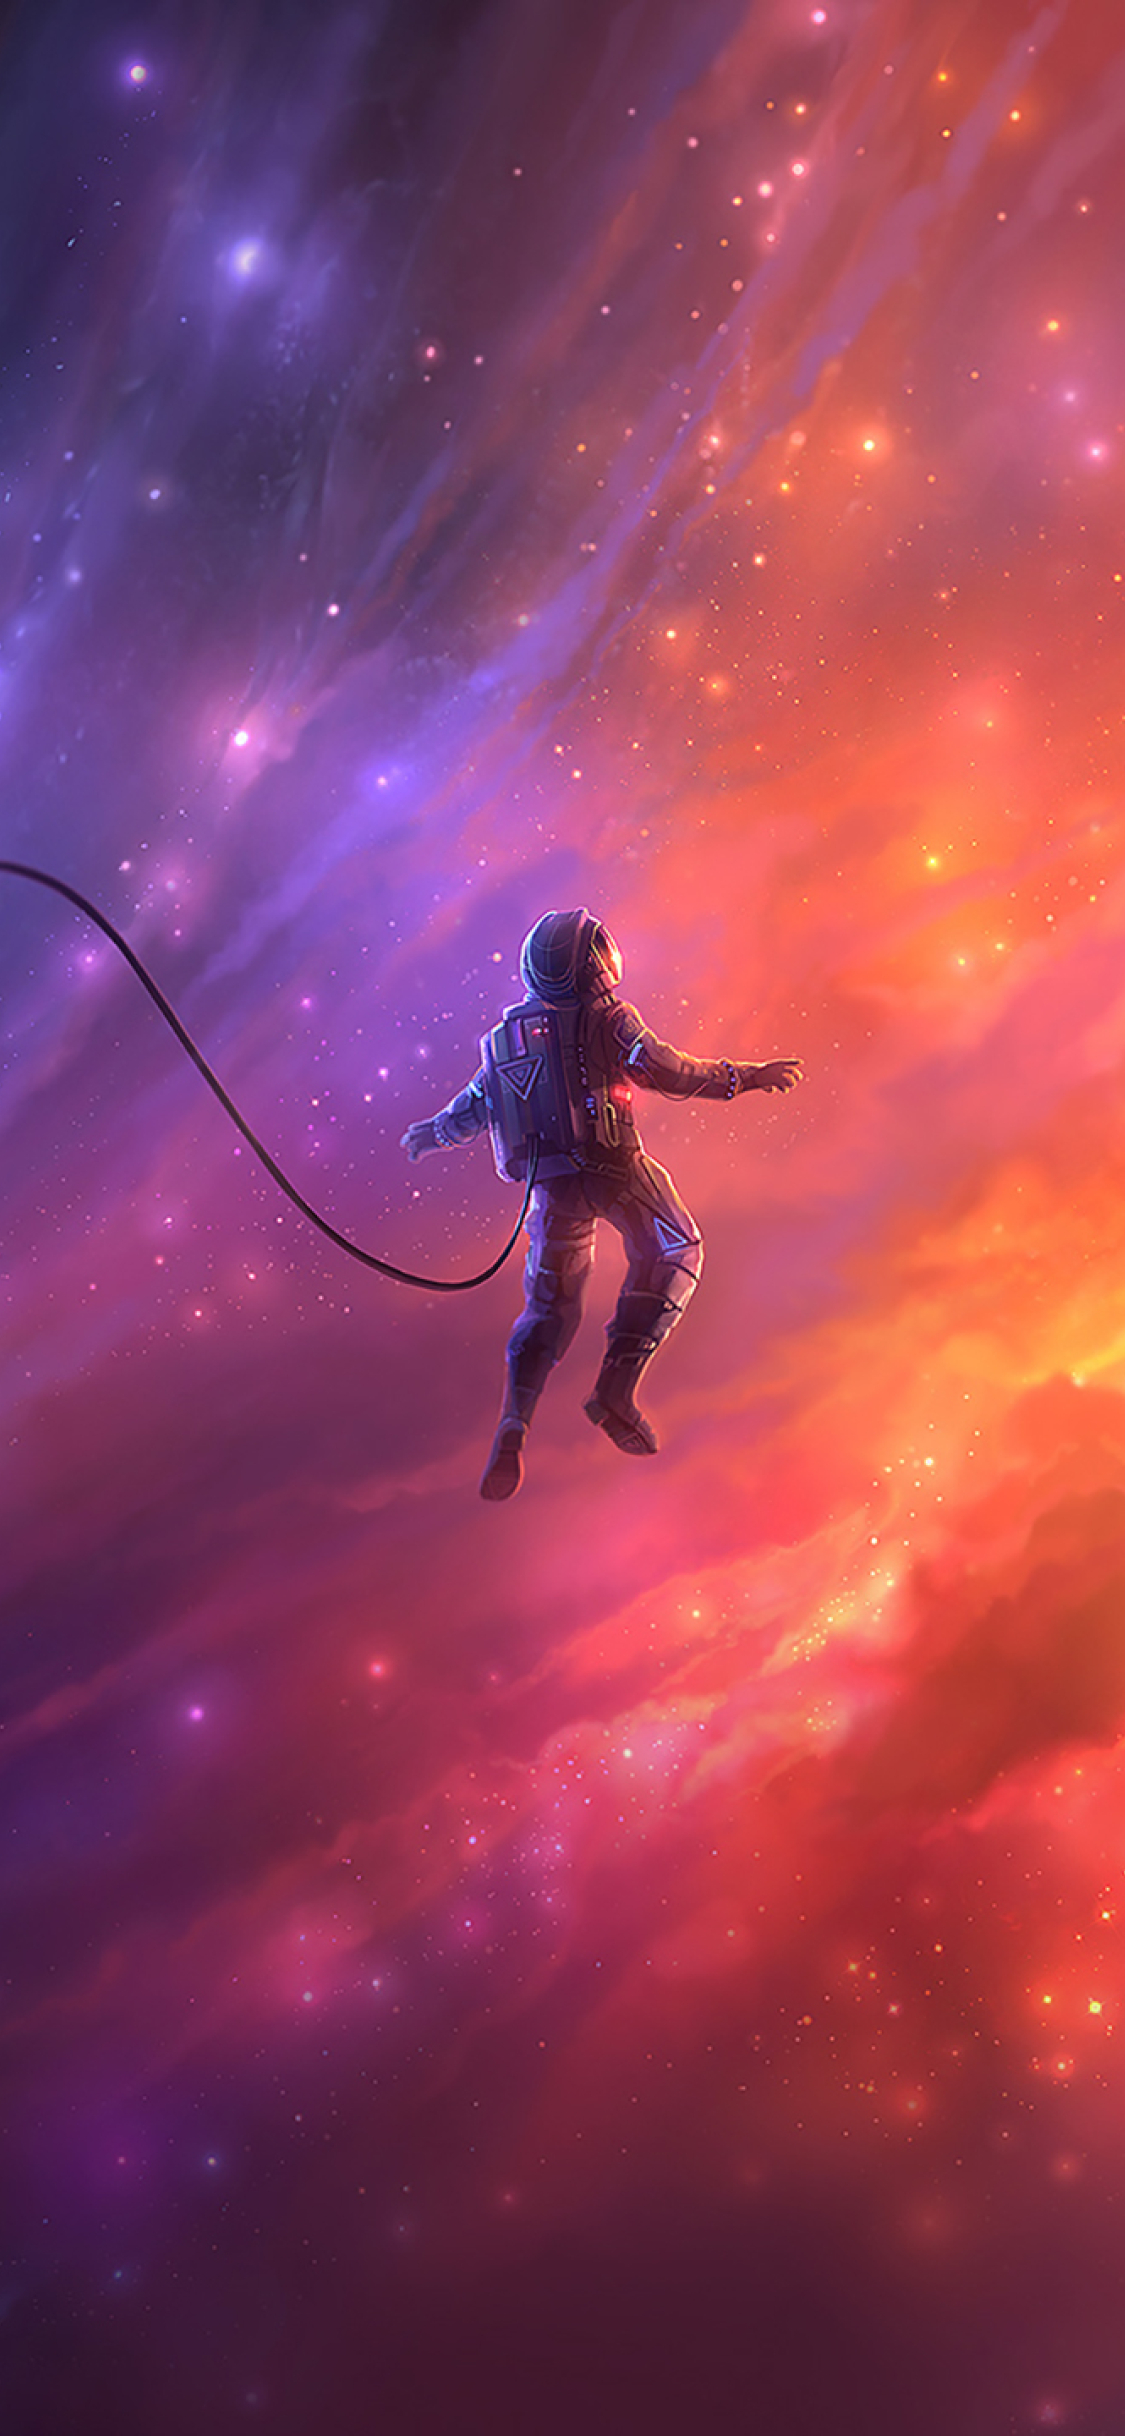 1125x2436 Astronaut In Space Iphone XS,Iphone 10,Iphone X Wallpaper, HD